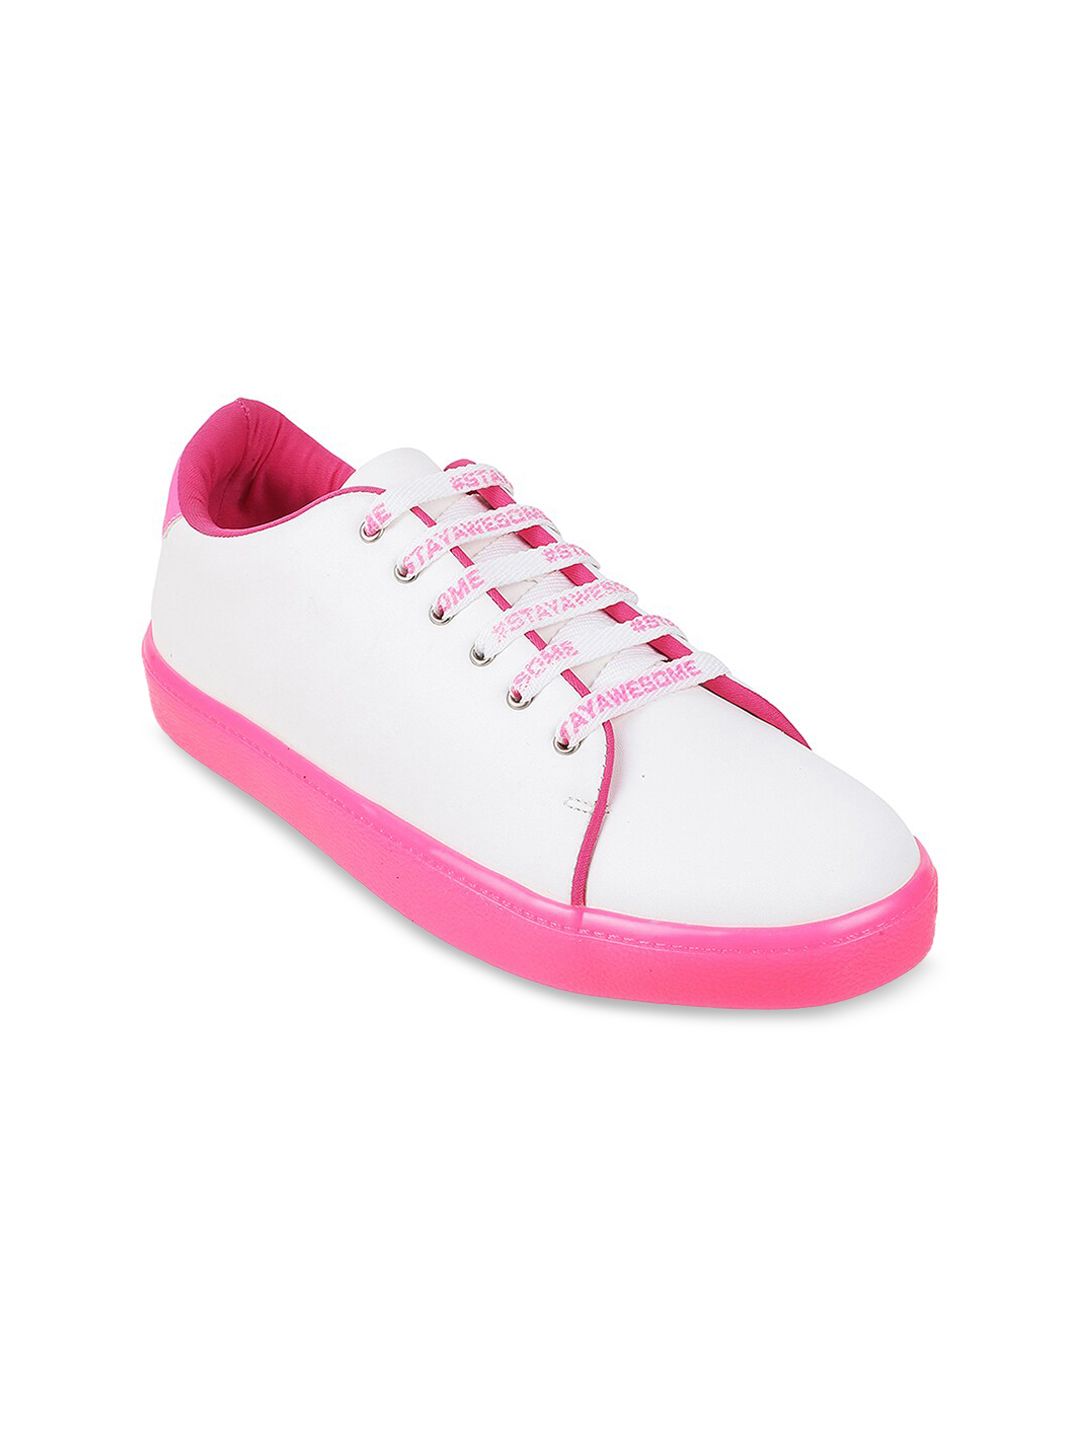 Mochi Women Pink & White Colourblocked Sneakers Price in India